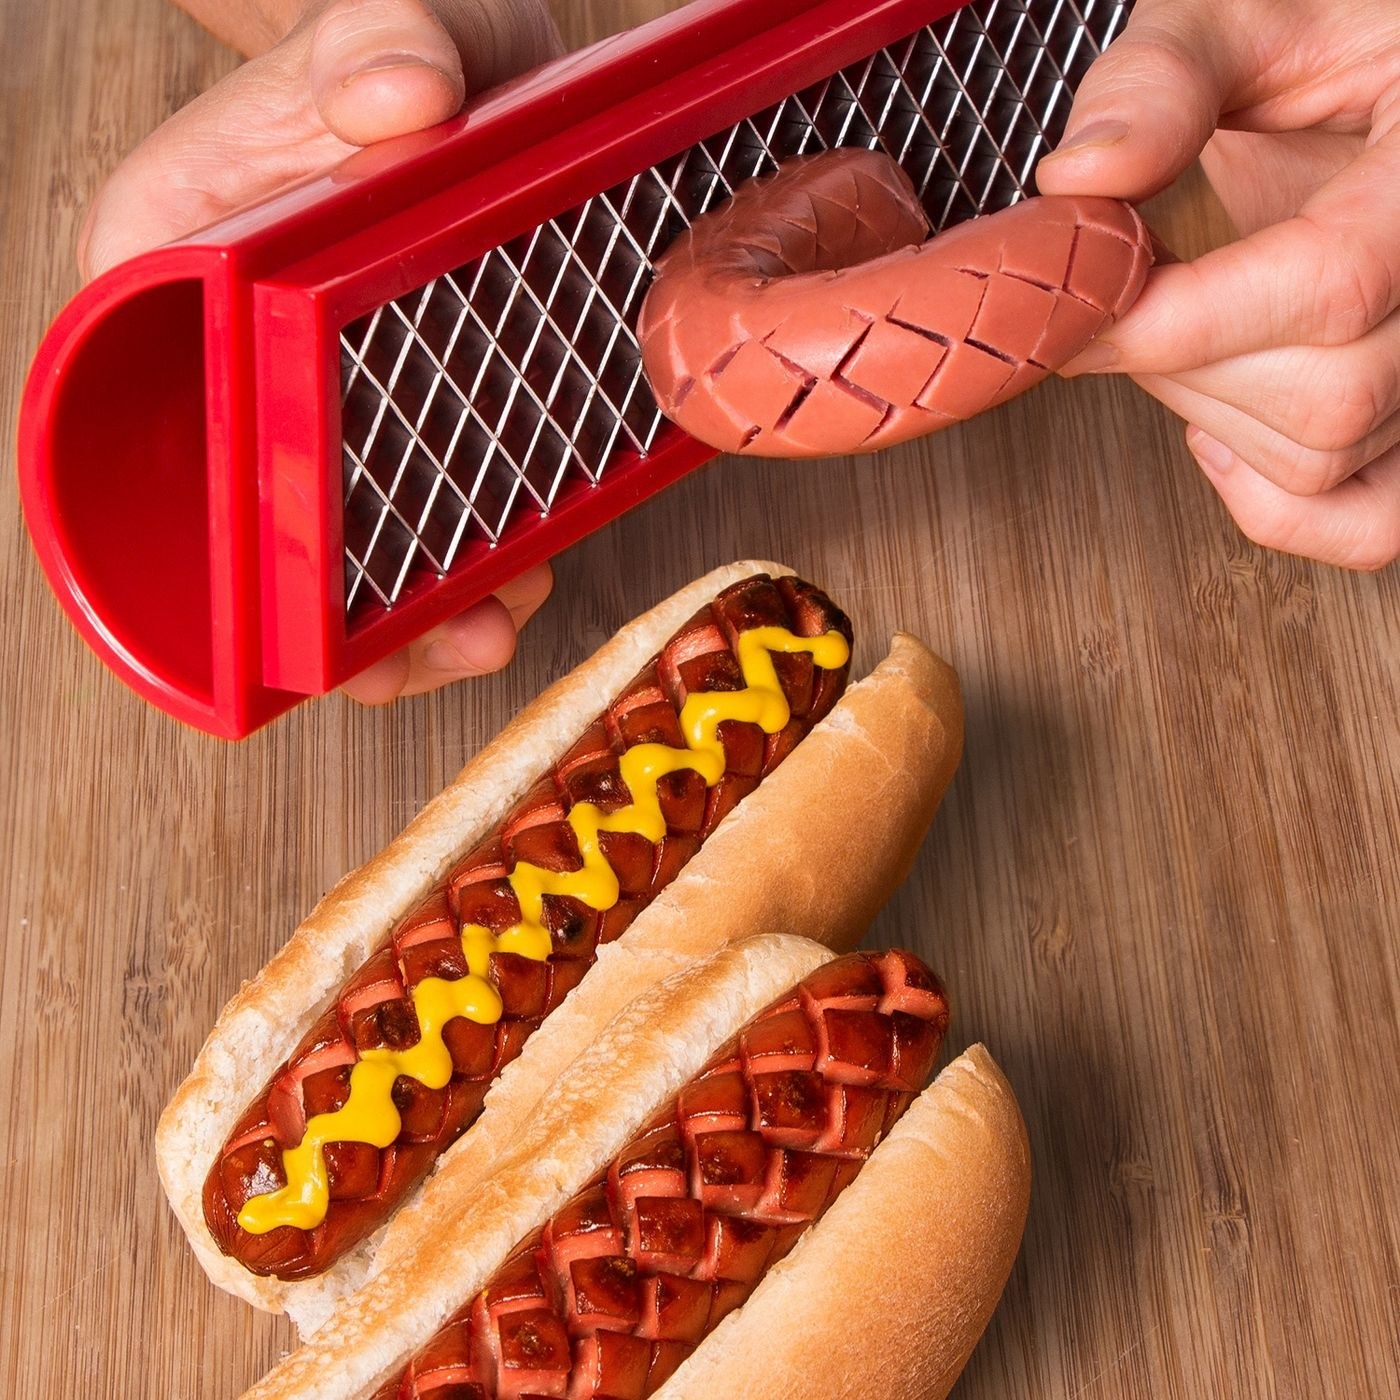 criss-crossed blade cutting into a hot dog